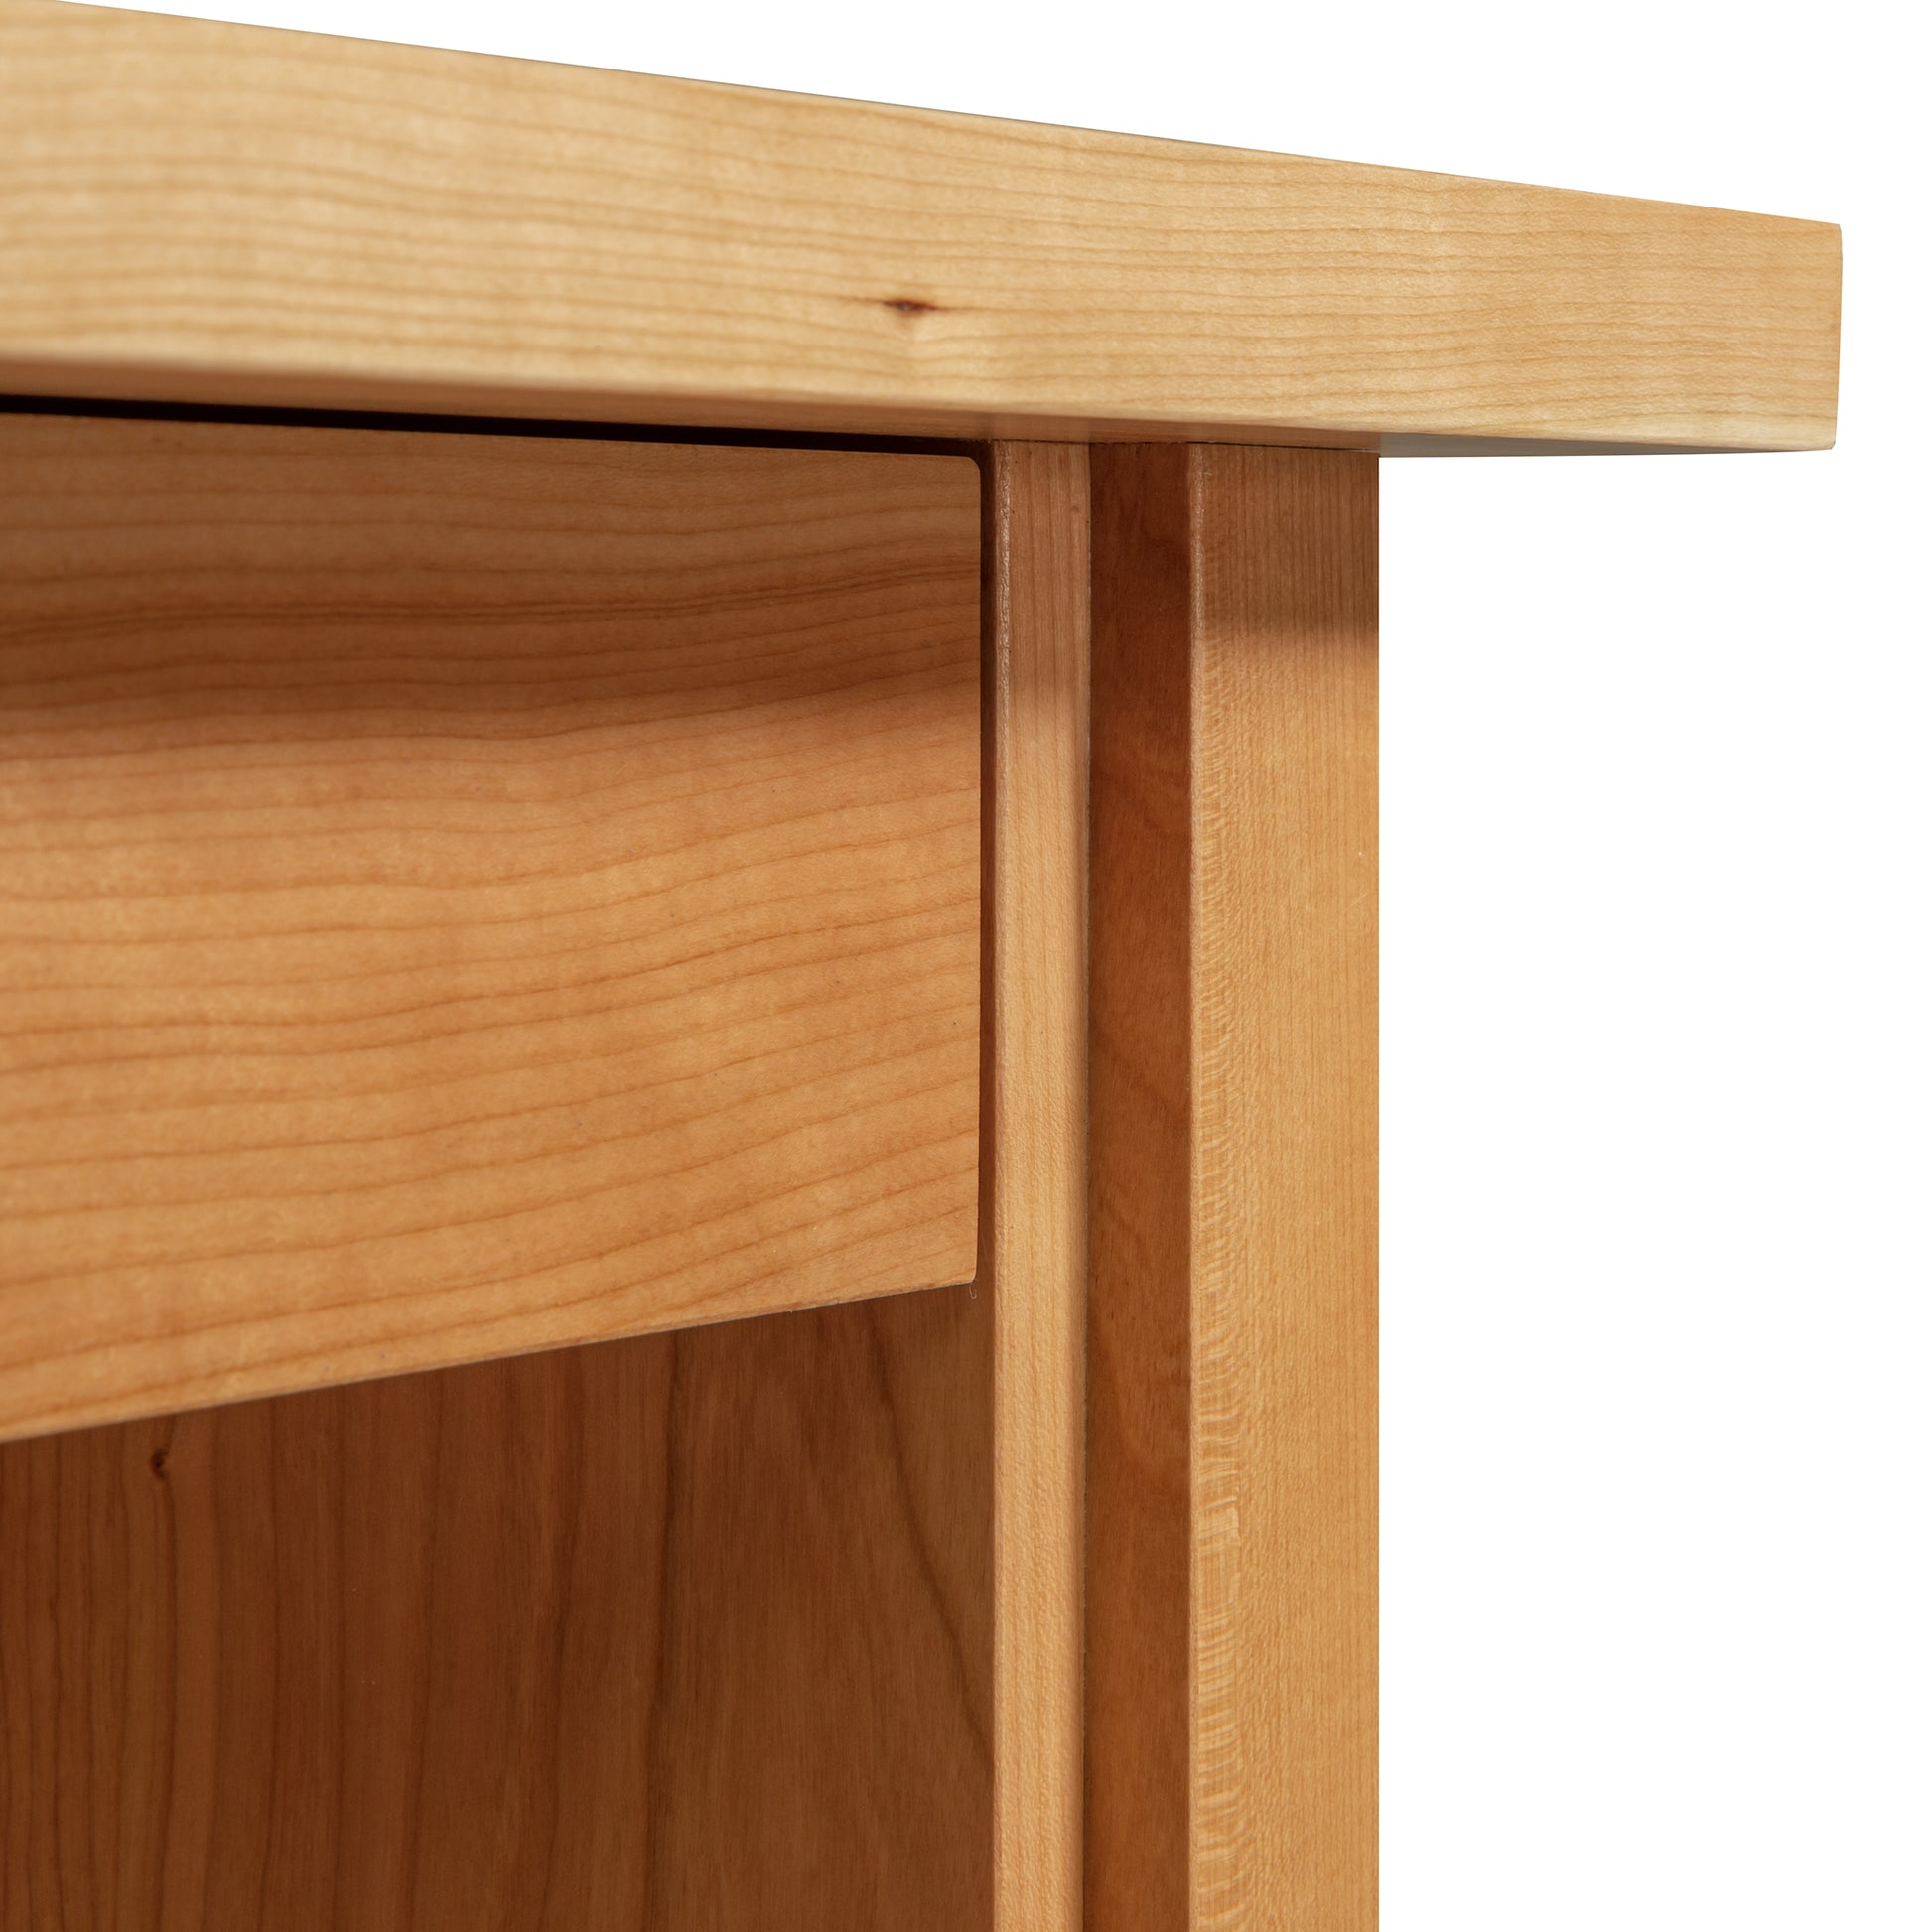 A close up of a wooden desk with a drawer.